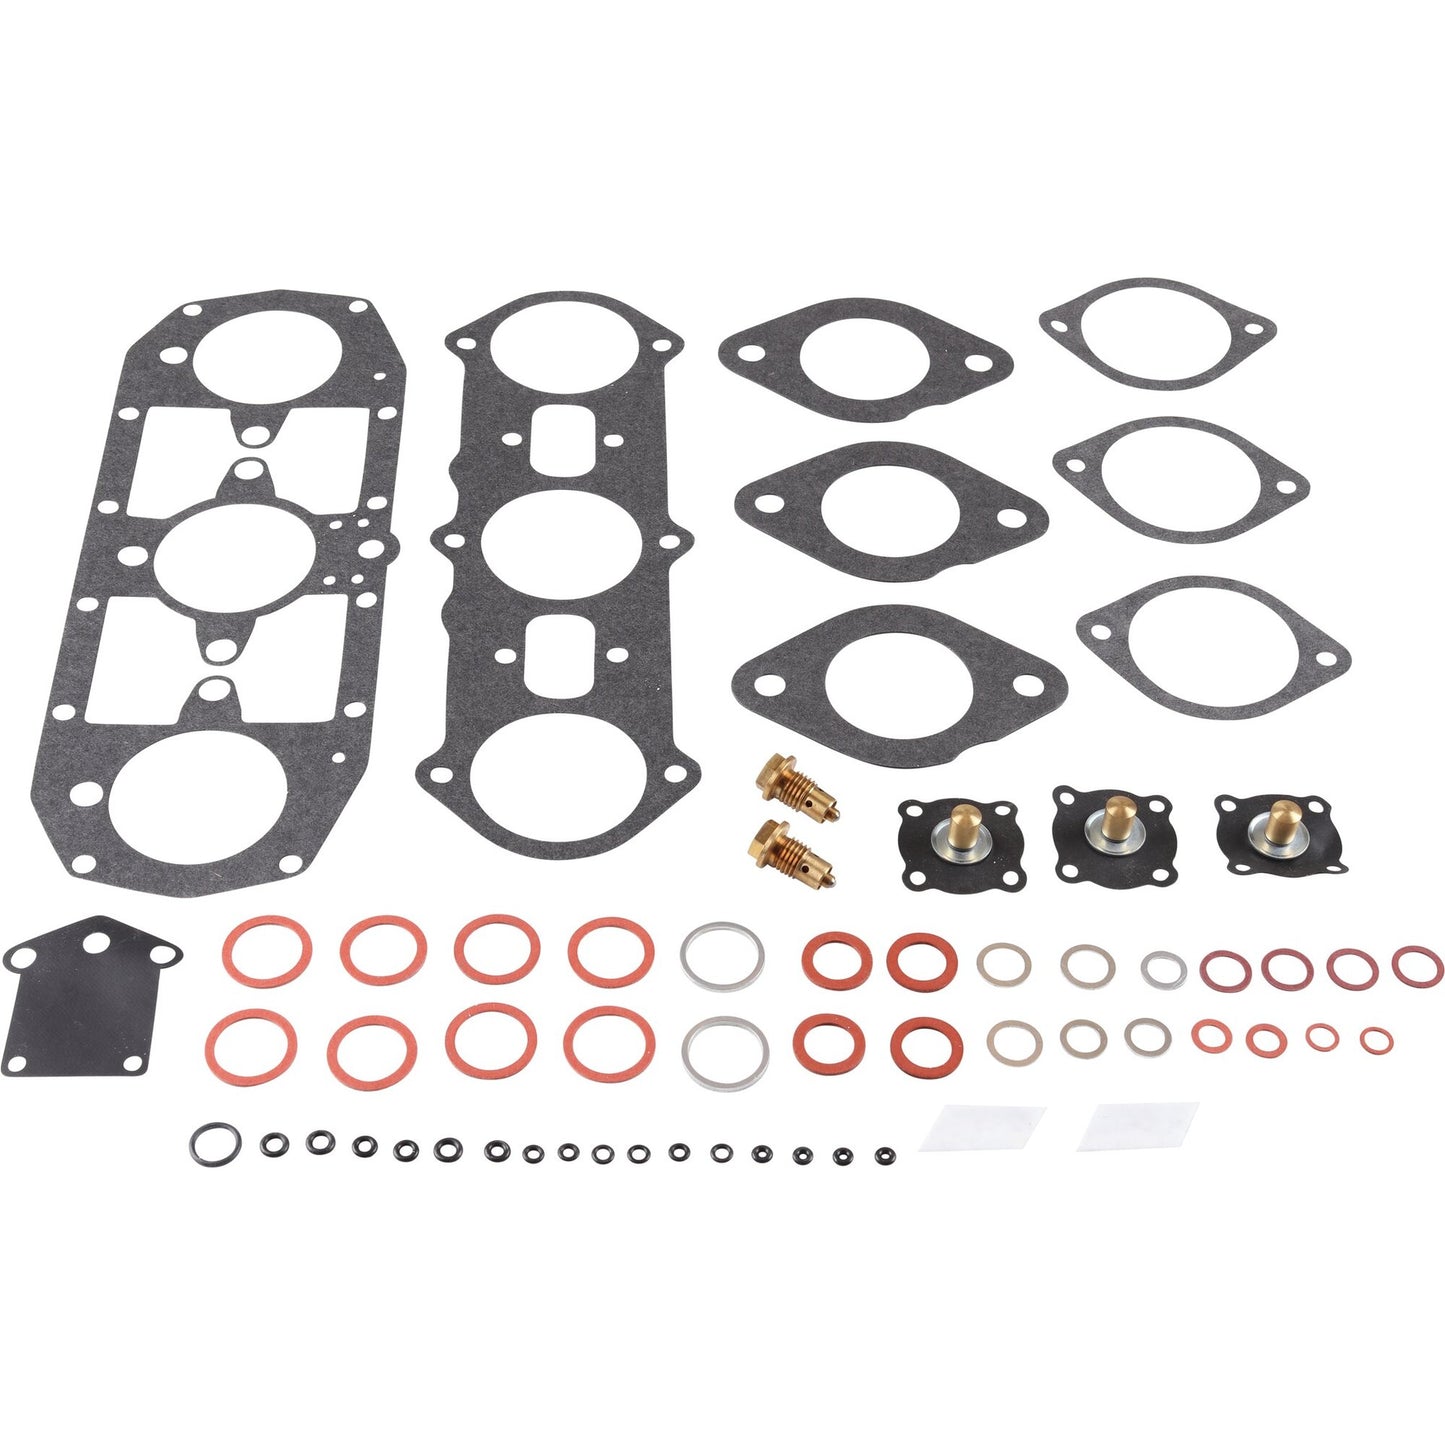 Gasket Set For Carburettor Zenith 40 TIN, 911 (67-73) - Sierra Madre Collection